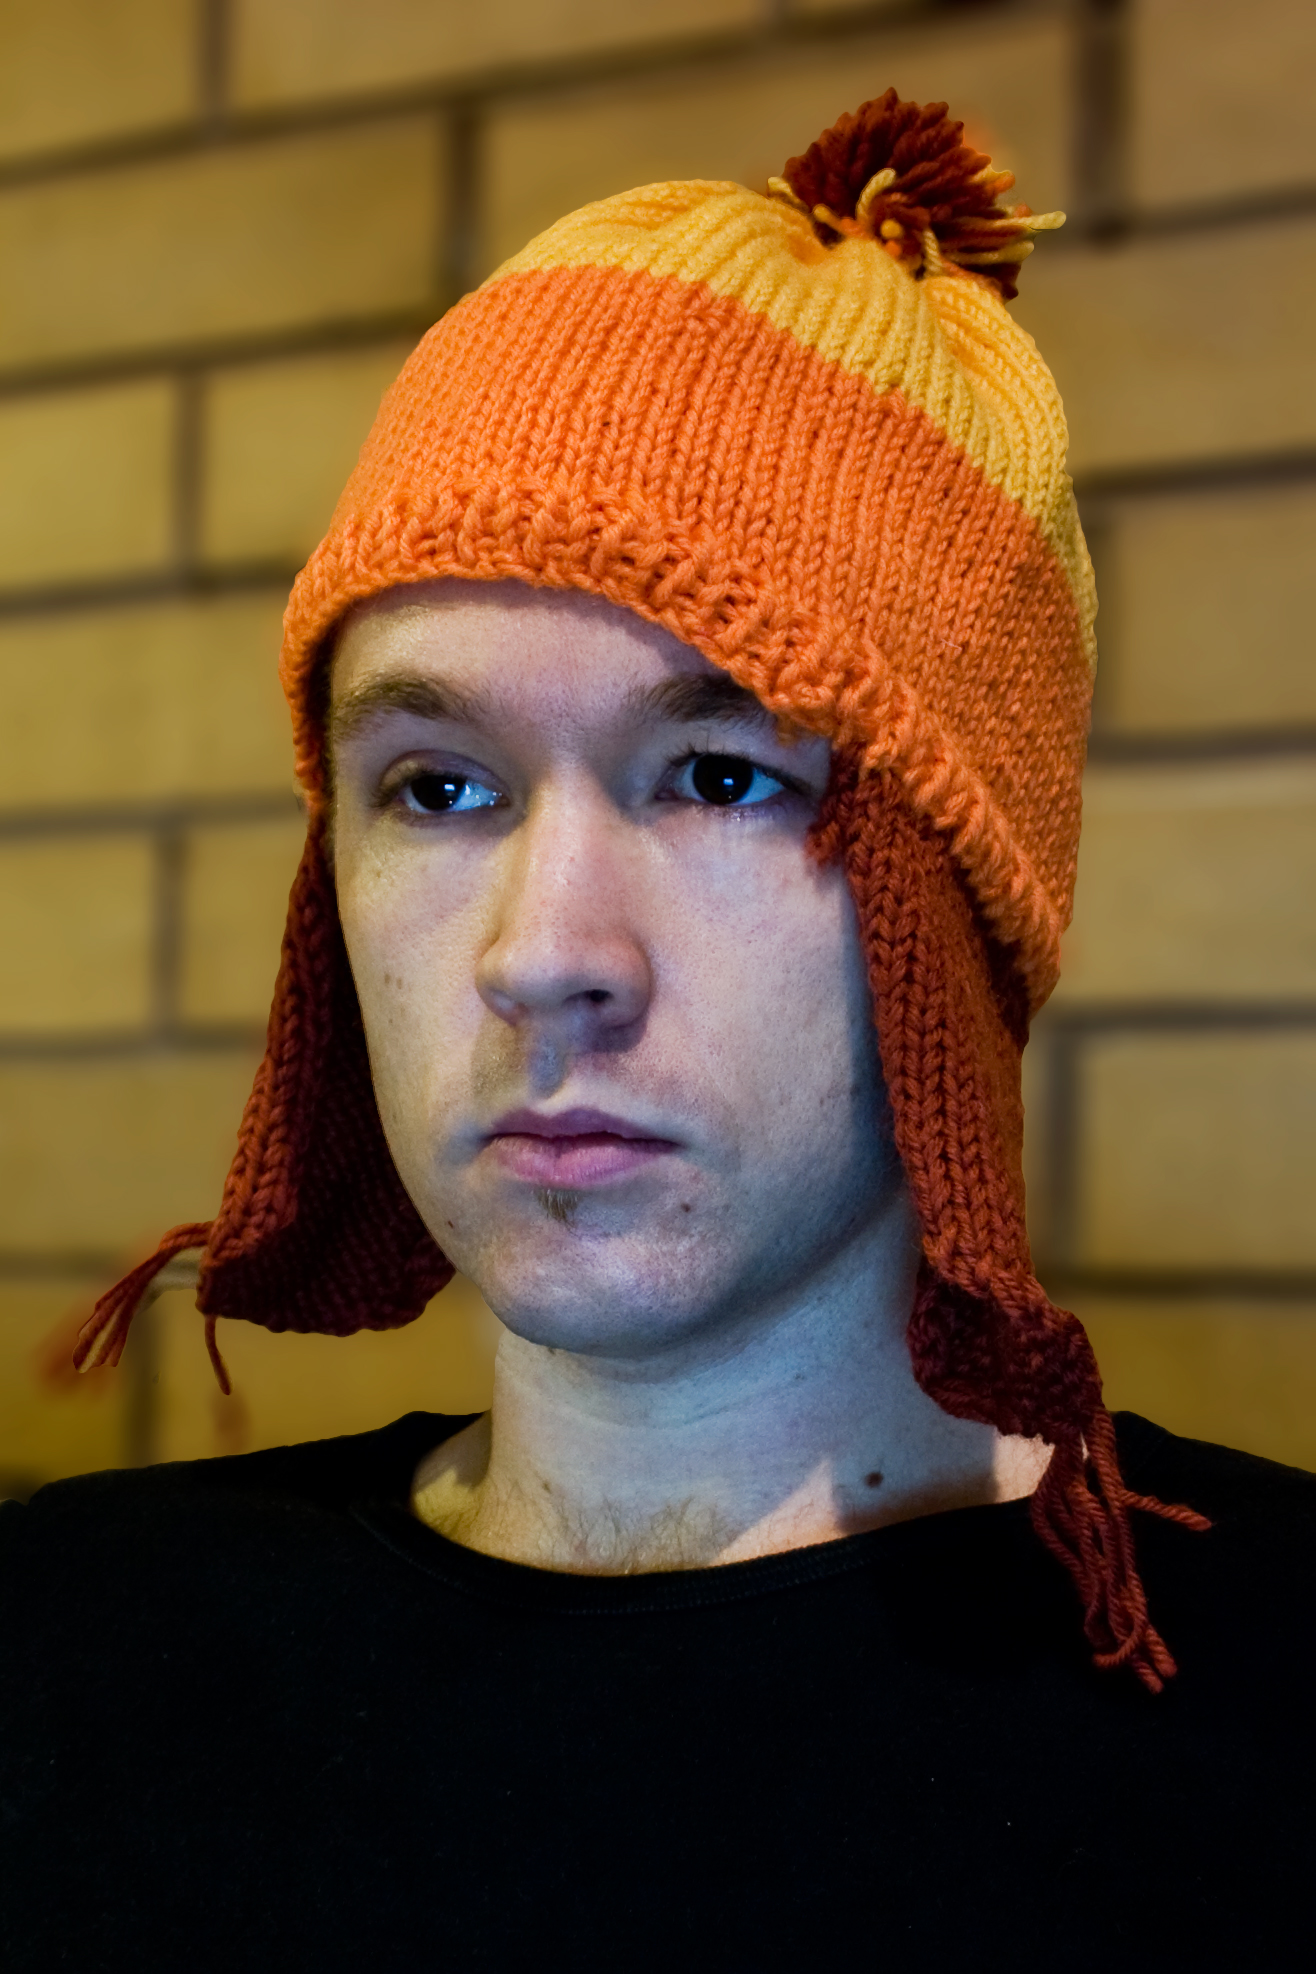 man wearing orange and yellow knitted hat